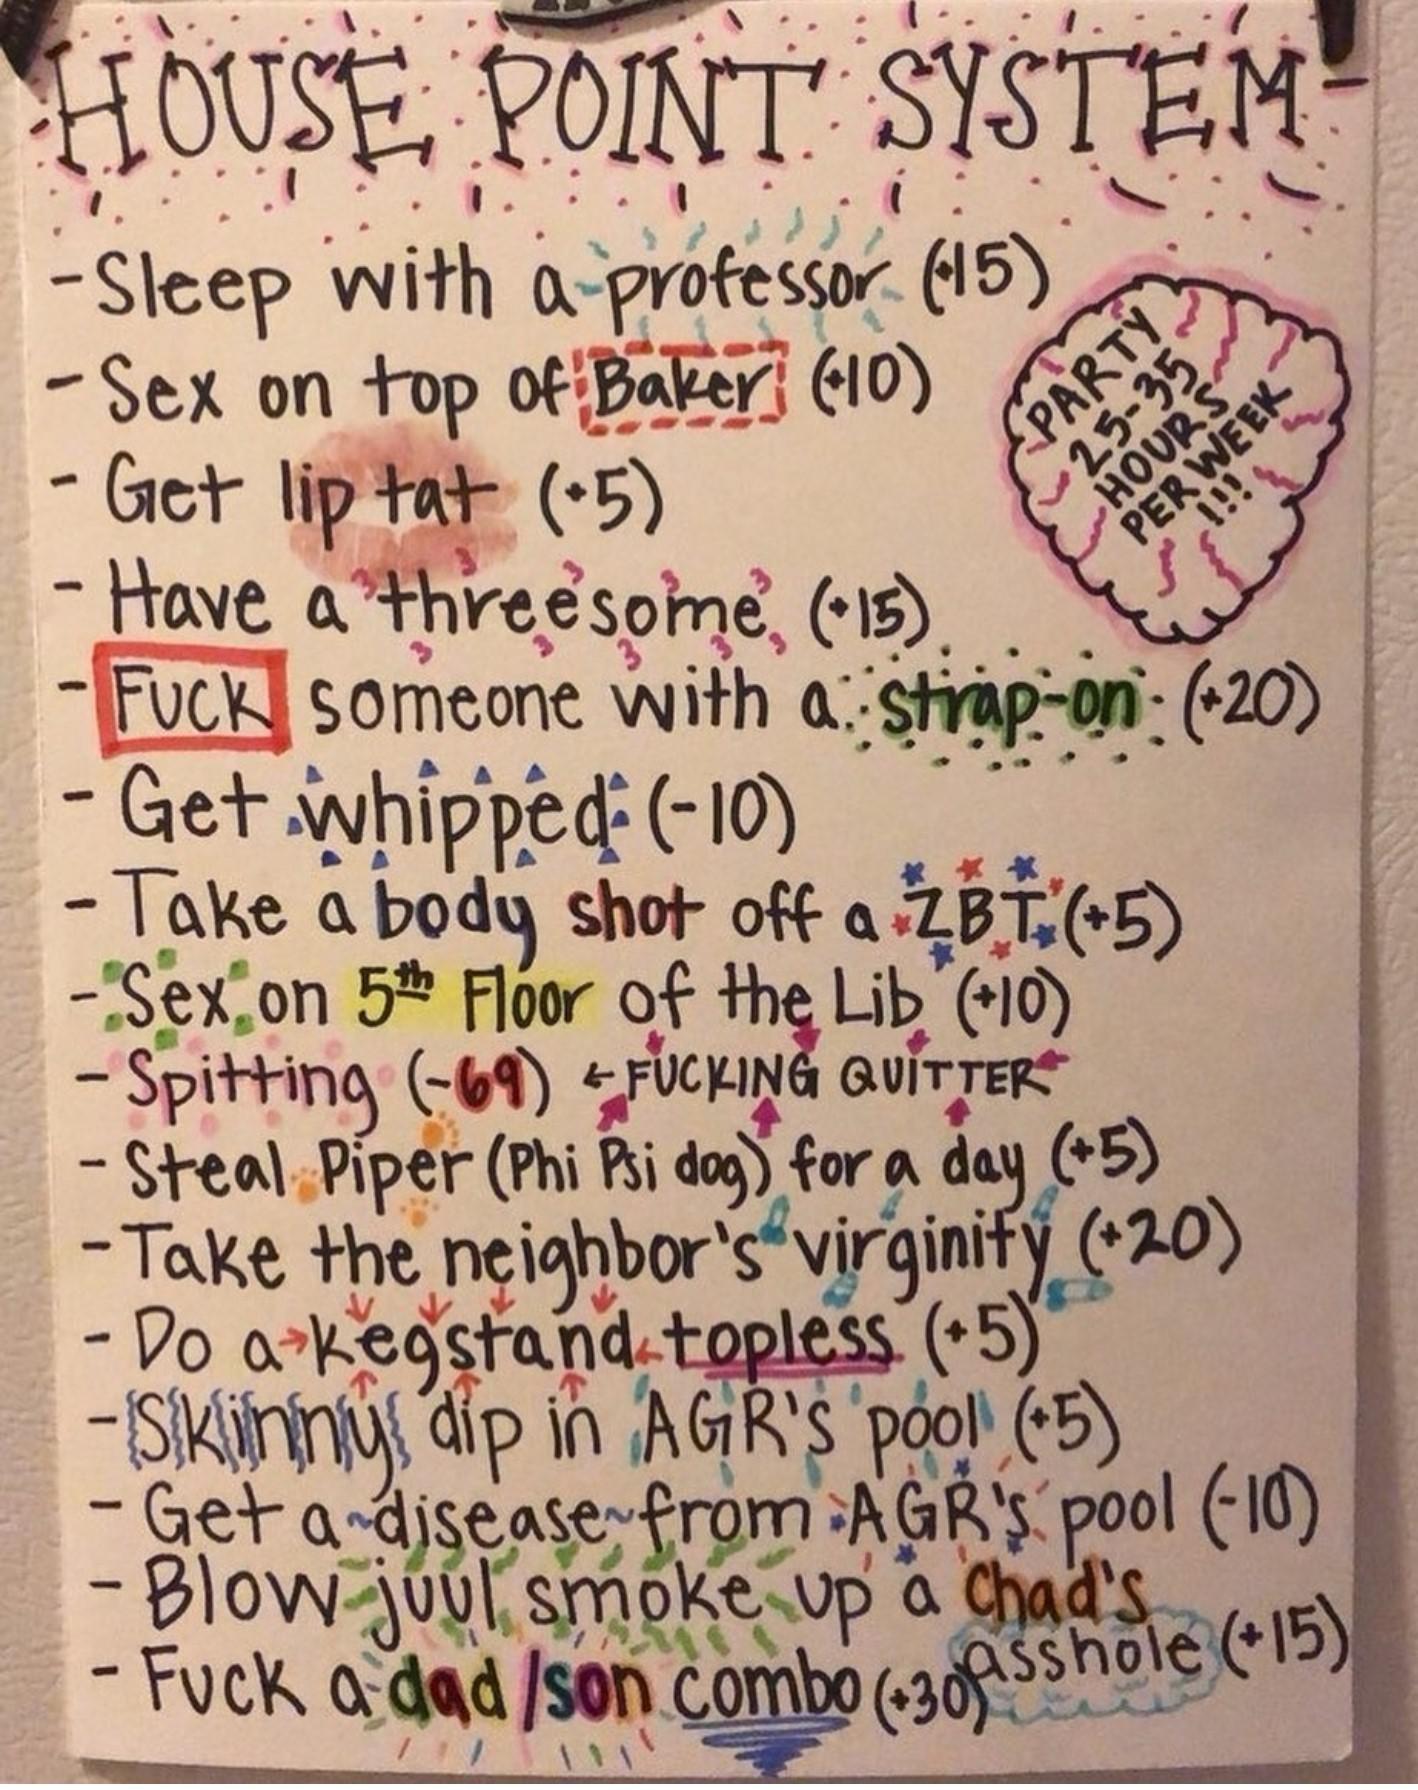 handwriting - House Point System Hours Per Wee Sleep with a professor 15 on Sex on top of Baker 10 Comes Get lip tat 5 Have a threesome 15. Fuck, someone with a strapon 20 Get .whippede 10 Take a body shot off a Zbt 5 Sex on 5th Floor of the Lib 10 Spitti